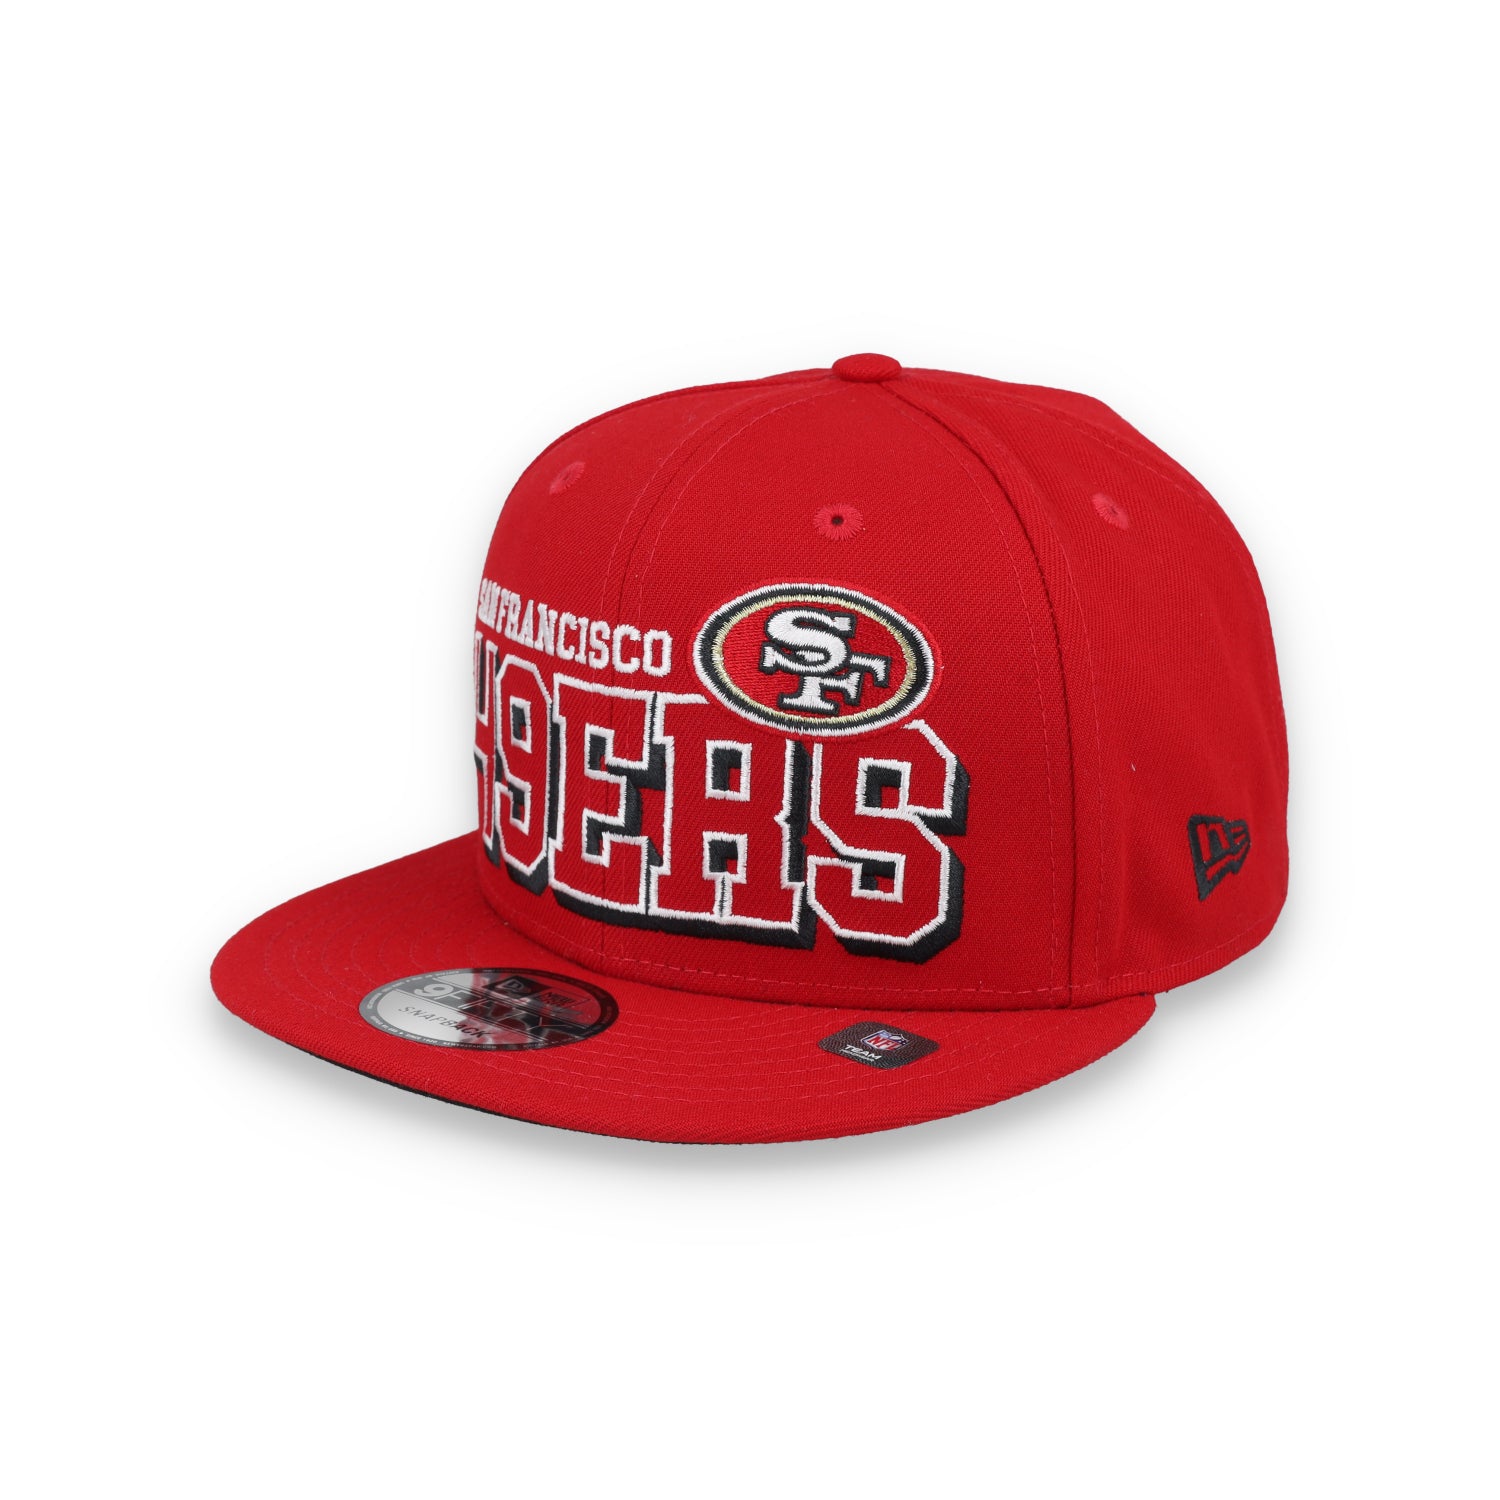 New Era San Francisco 49ers Game Day 9FIFTY Snapback Hat